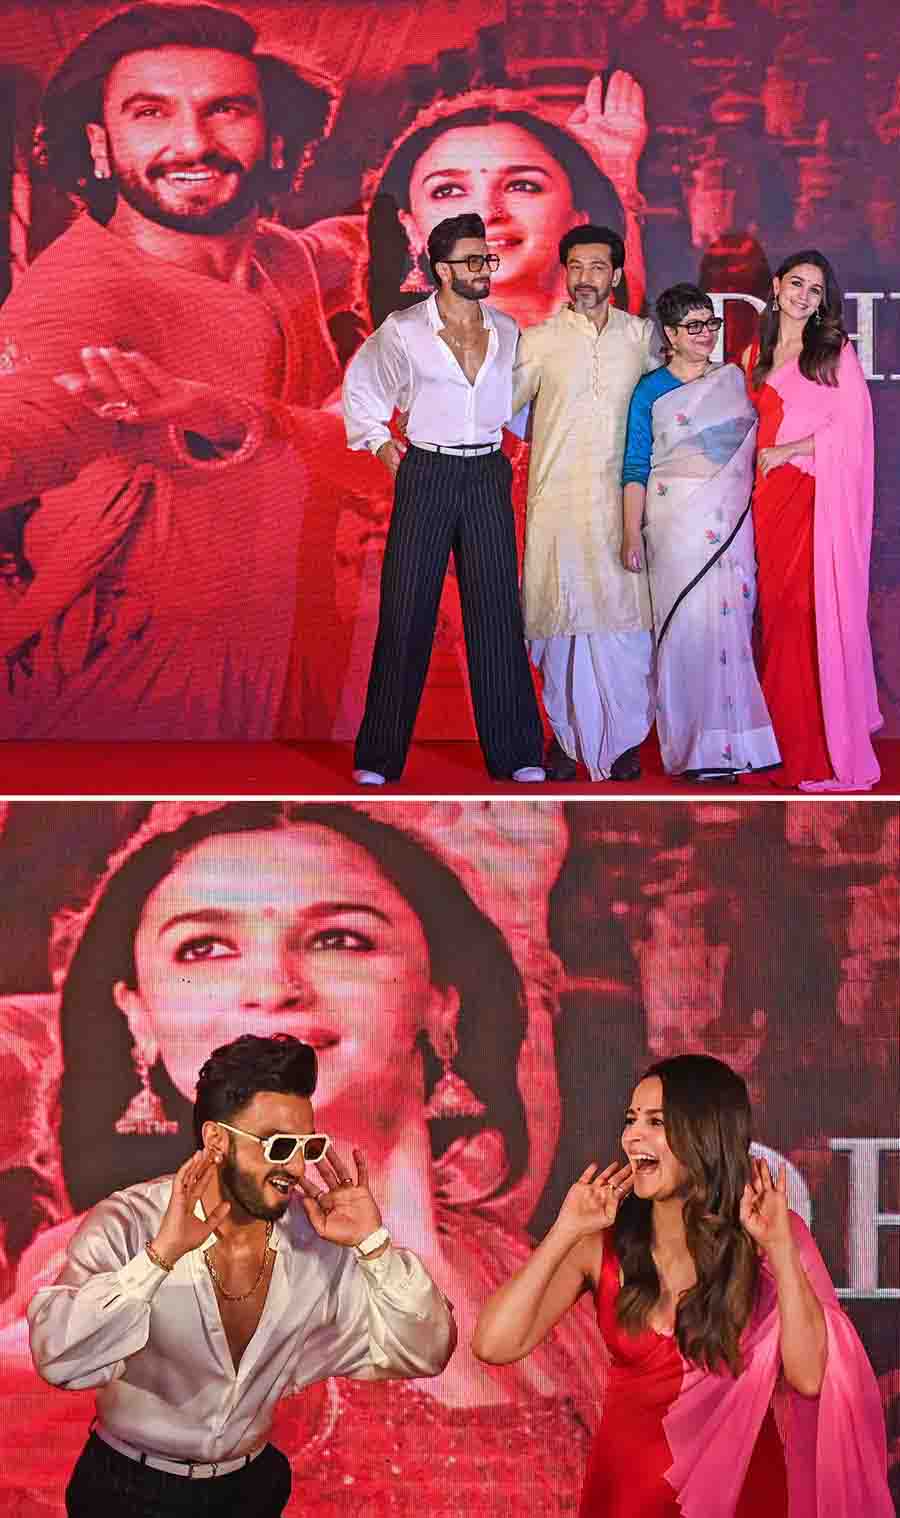 Ranveer Singh and Alia Bhatt were in Kolkata on Monday to promote their film ‘Rocky Aur Rani Kii Prem Kahaani’. The duo interacted with the media, floored the audience with 'Nomoshkar Kolkata' and also grooved to the trending 'What jhumka' from the movie. Tollywood actors Tota Roy Choudhury and Churni Ganguly, who play parents to Alia's Rani in the film that marks Karan Johars 25th year as filmmaker, were also present at the event that launched the song 'Dhindora baaja re'